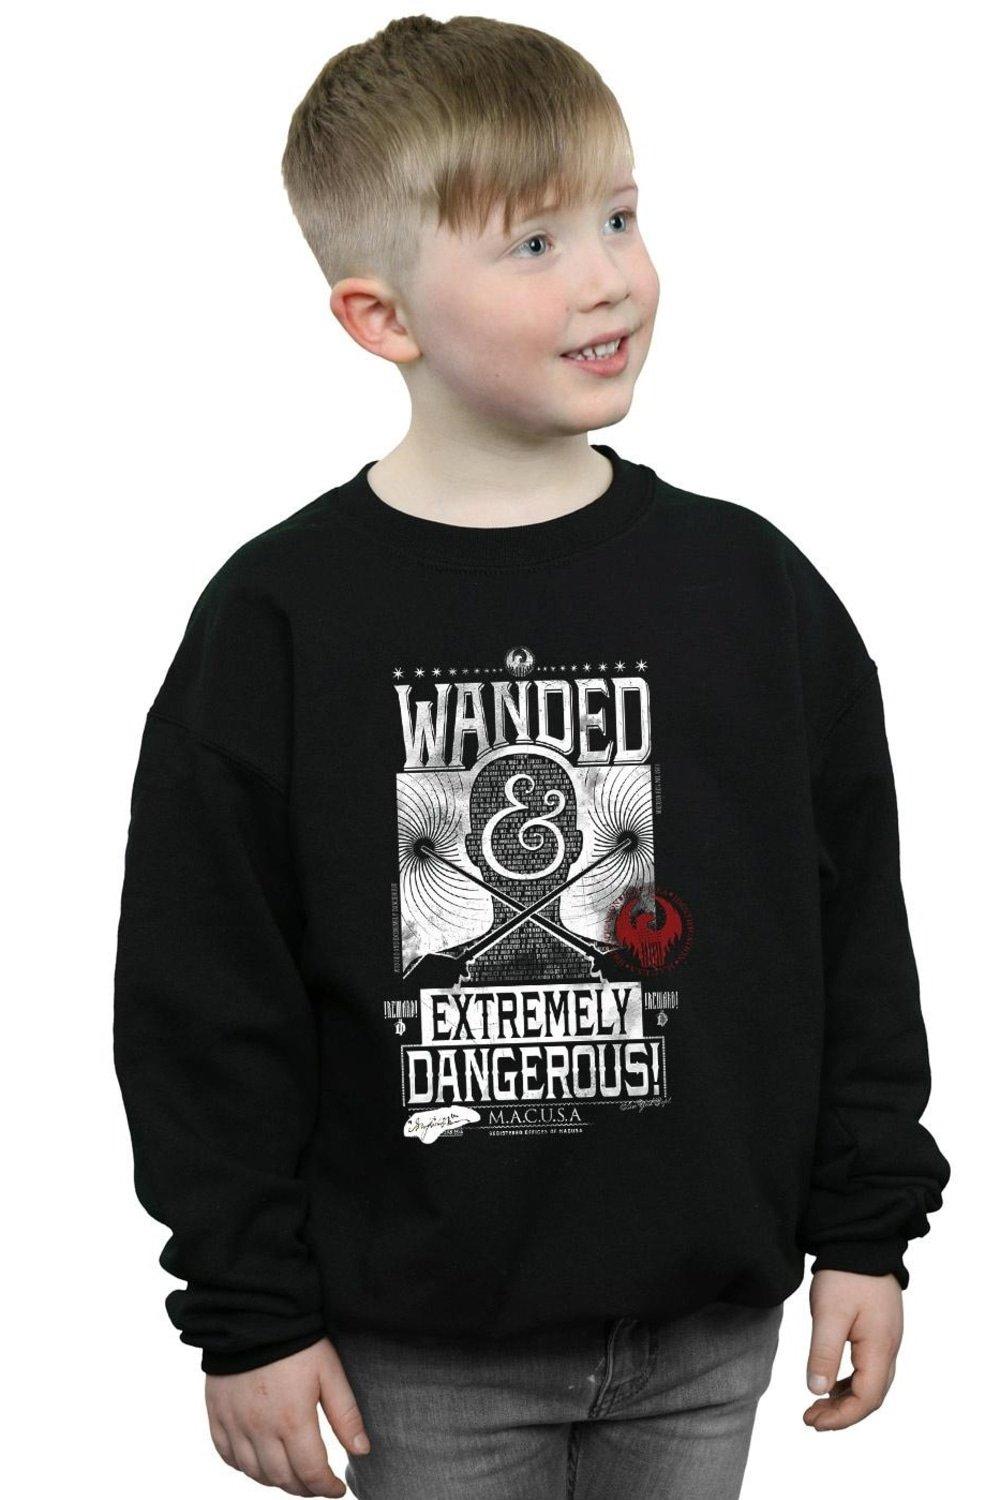 Wanded And Extremely Dangerous Sweatshirt